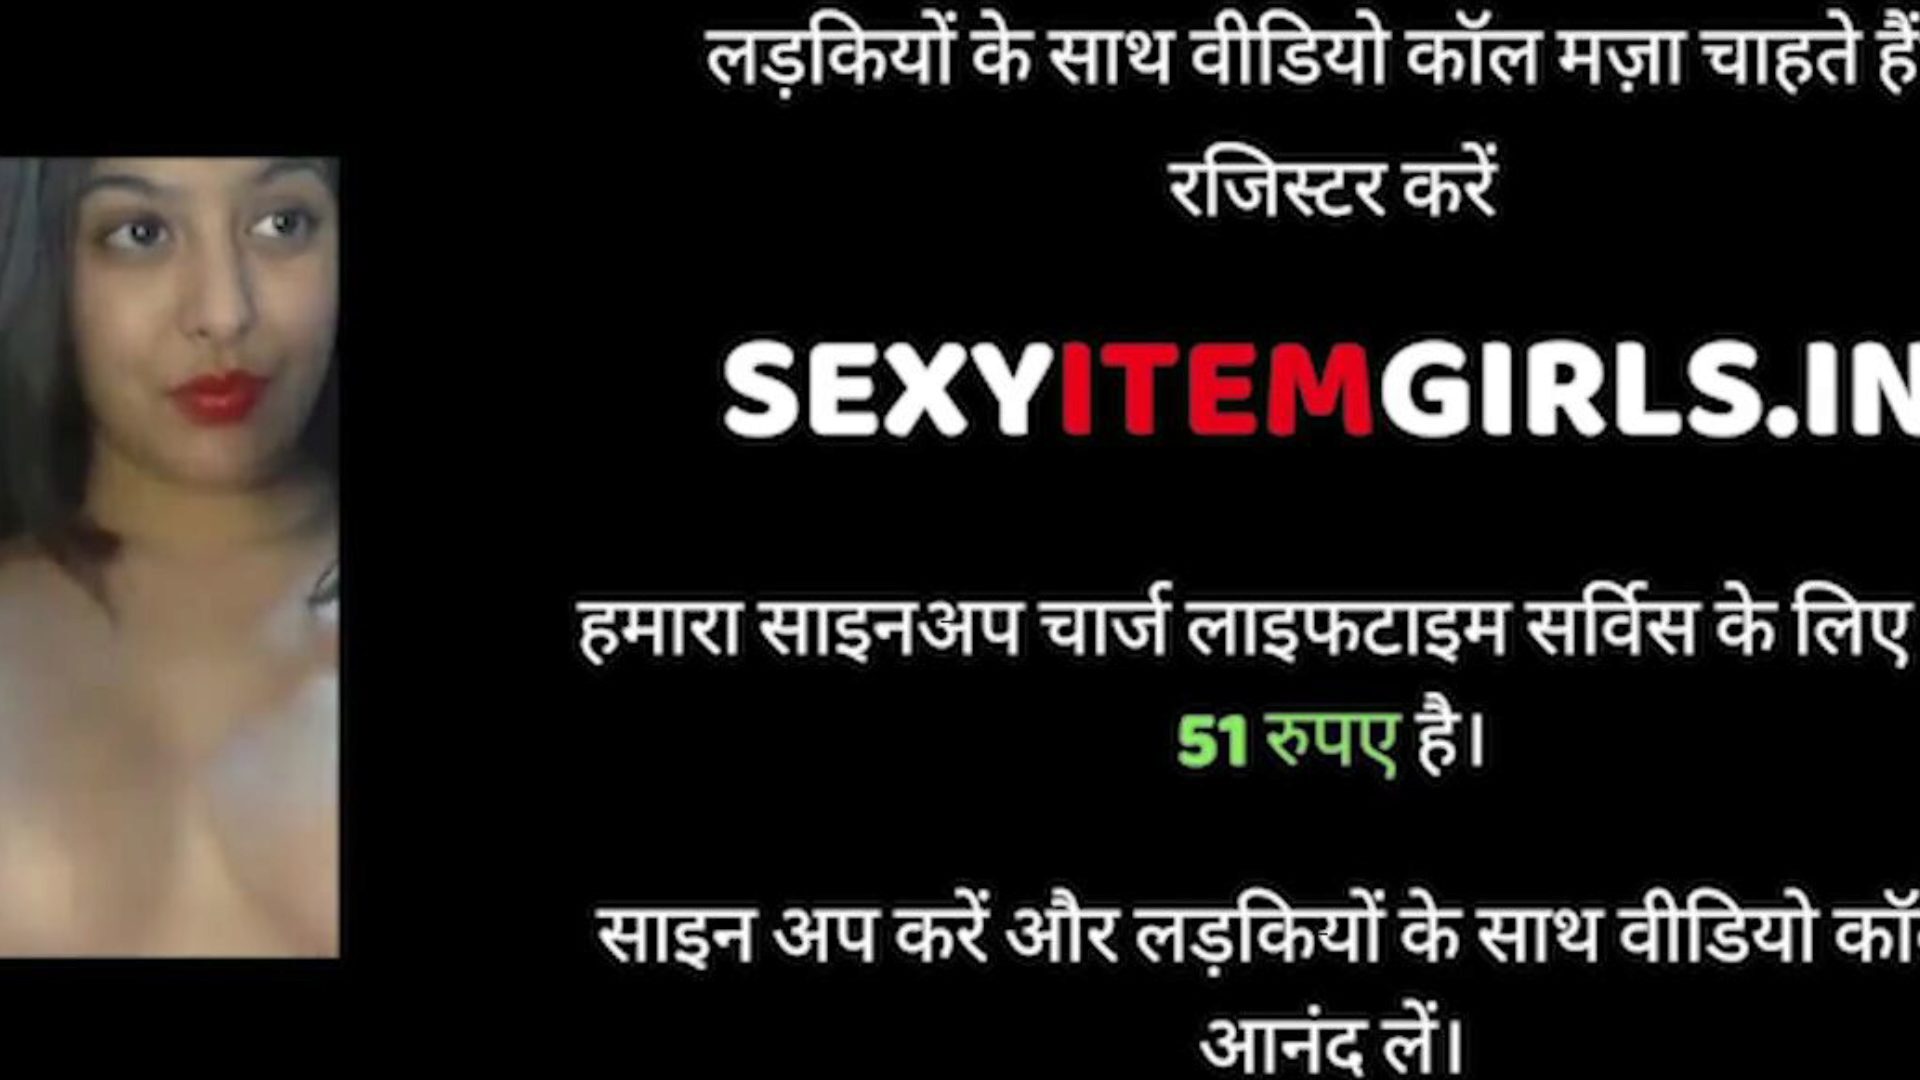 Finaly Girlfriend Ne Liya Chod Diya, Free Porn 2c: xHamster Watch Finaly Girlfriend Ne Liya Chod Diya clip on xHamster, the most good HD romp tube website with tons of free-for-all Indian Girl and Boys & Home Made porno movie scenes